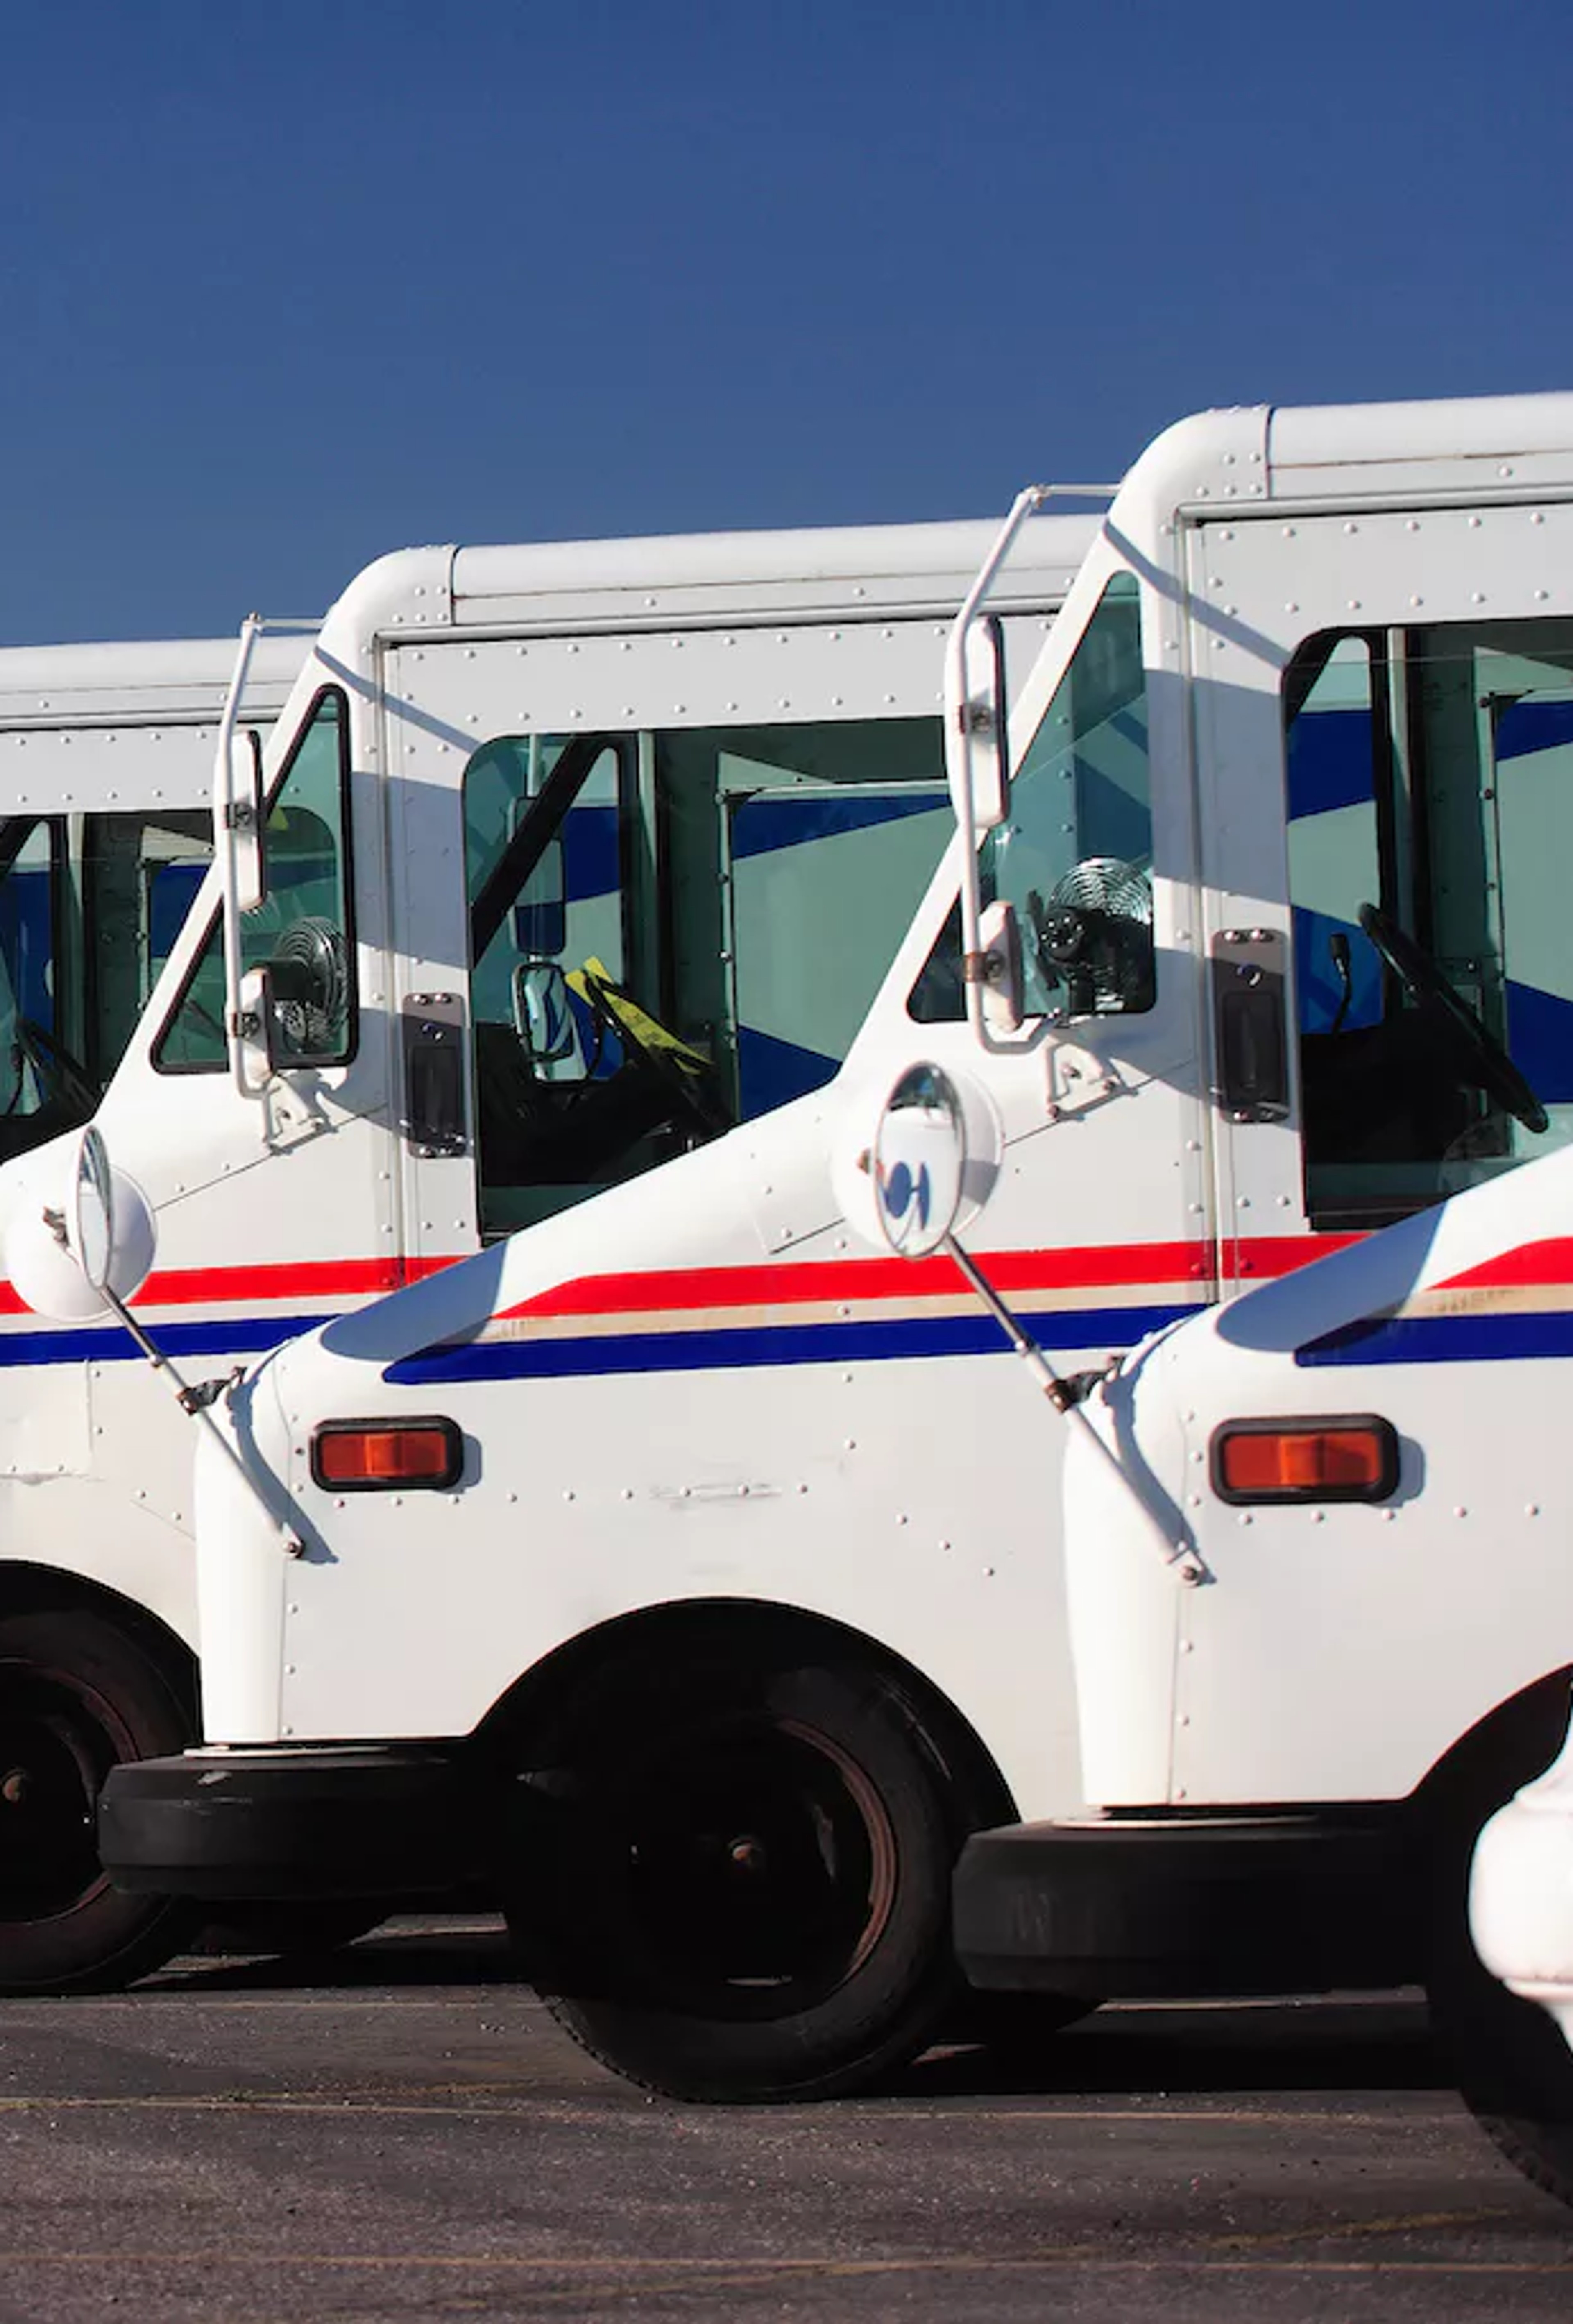 USPS Mail delivery trucks